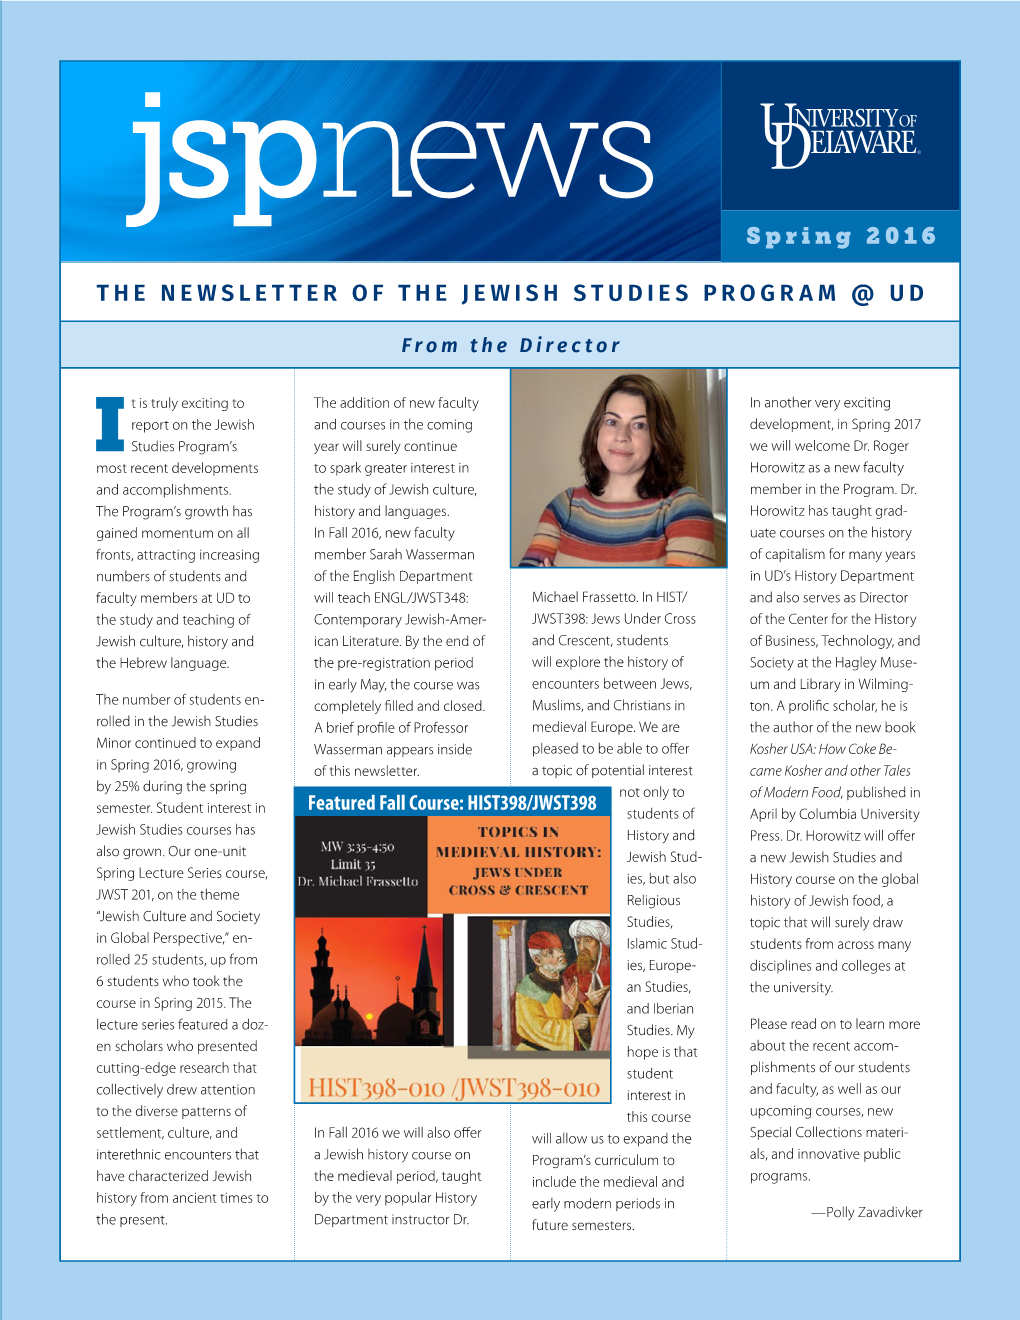 THE NEWSLETTER of the JEWISH STUDIES PROGRAM @ UD Spring